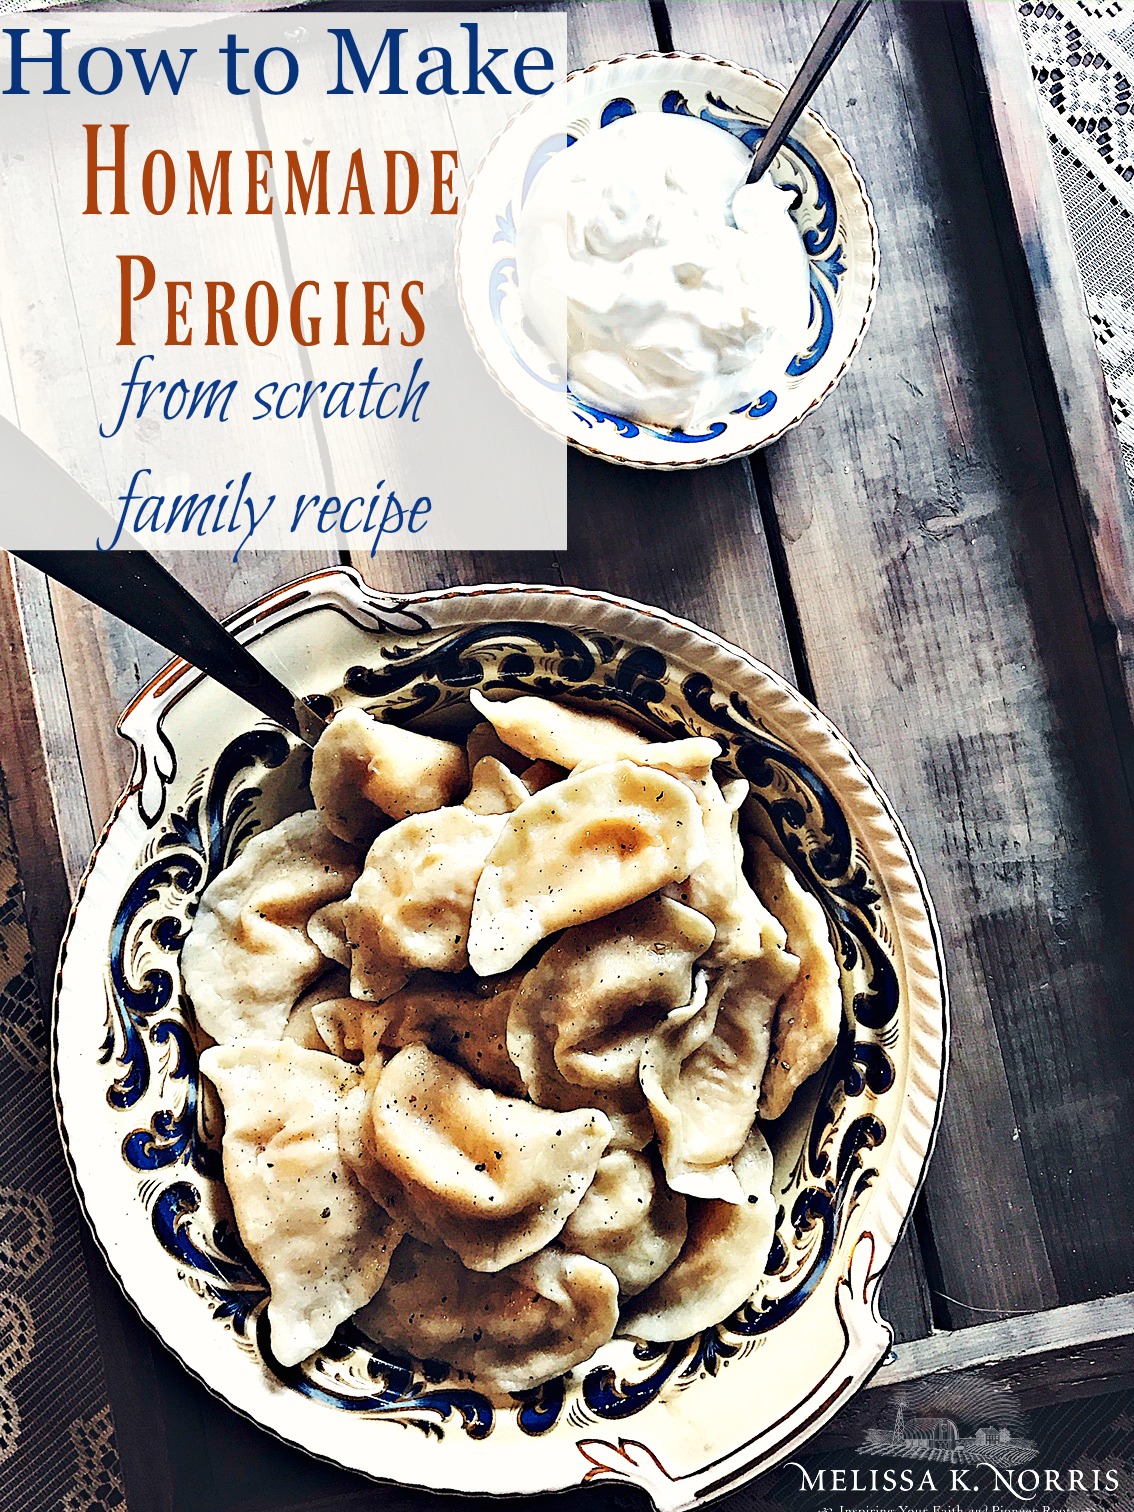 Bowl of homemade perogies sitting on a wooden table. Text overlay says, "How to Make Homemade Perogies From Scratch: Family Recipe".